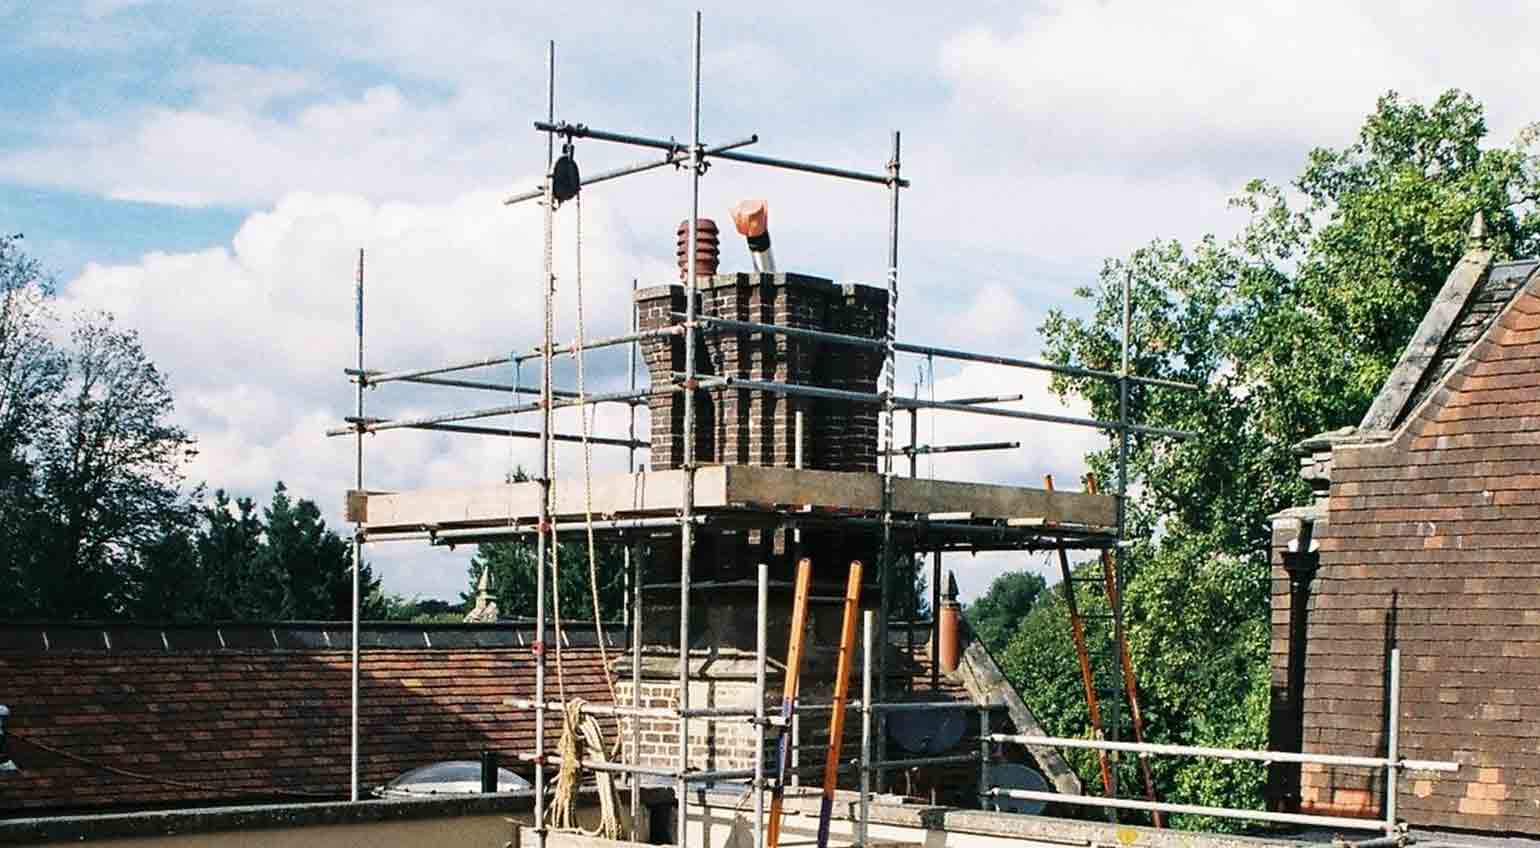 Scaffolding erected for a damp chimney repair job